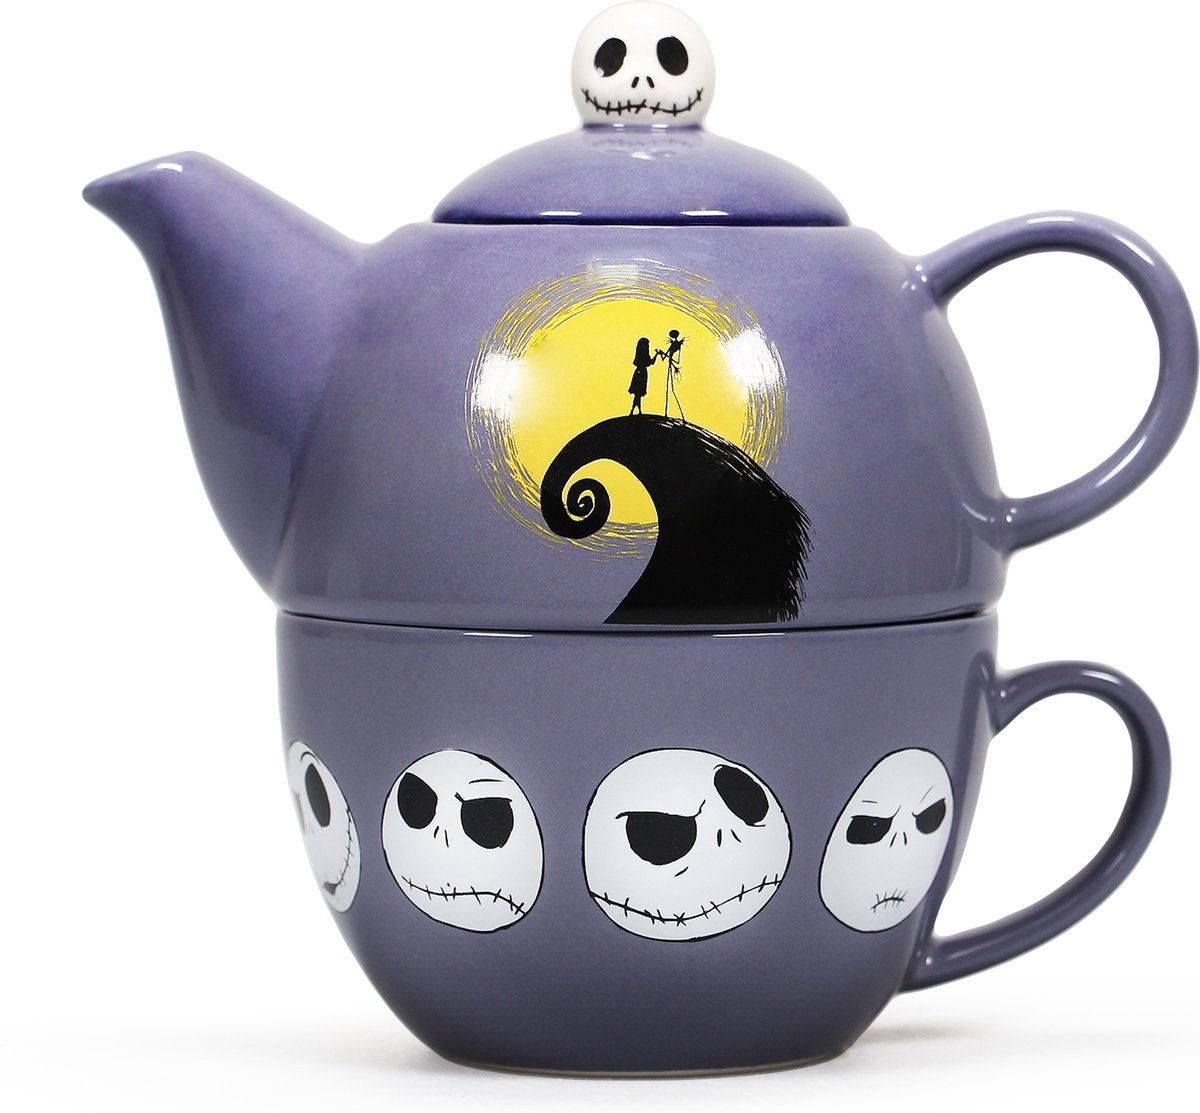 Disney - The Nightmare Before Christmas - Tea for One - Theepot - Half Moon Bay